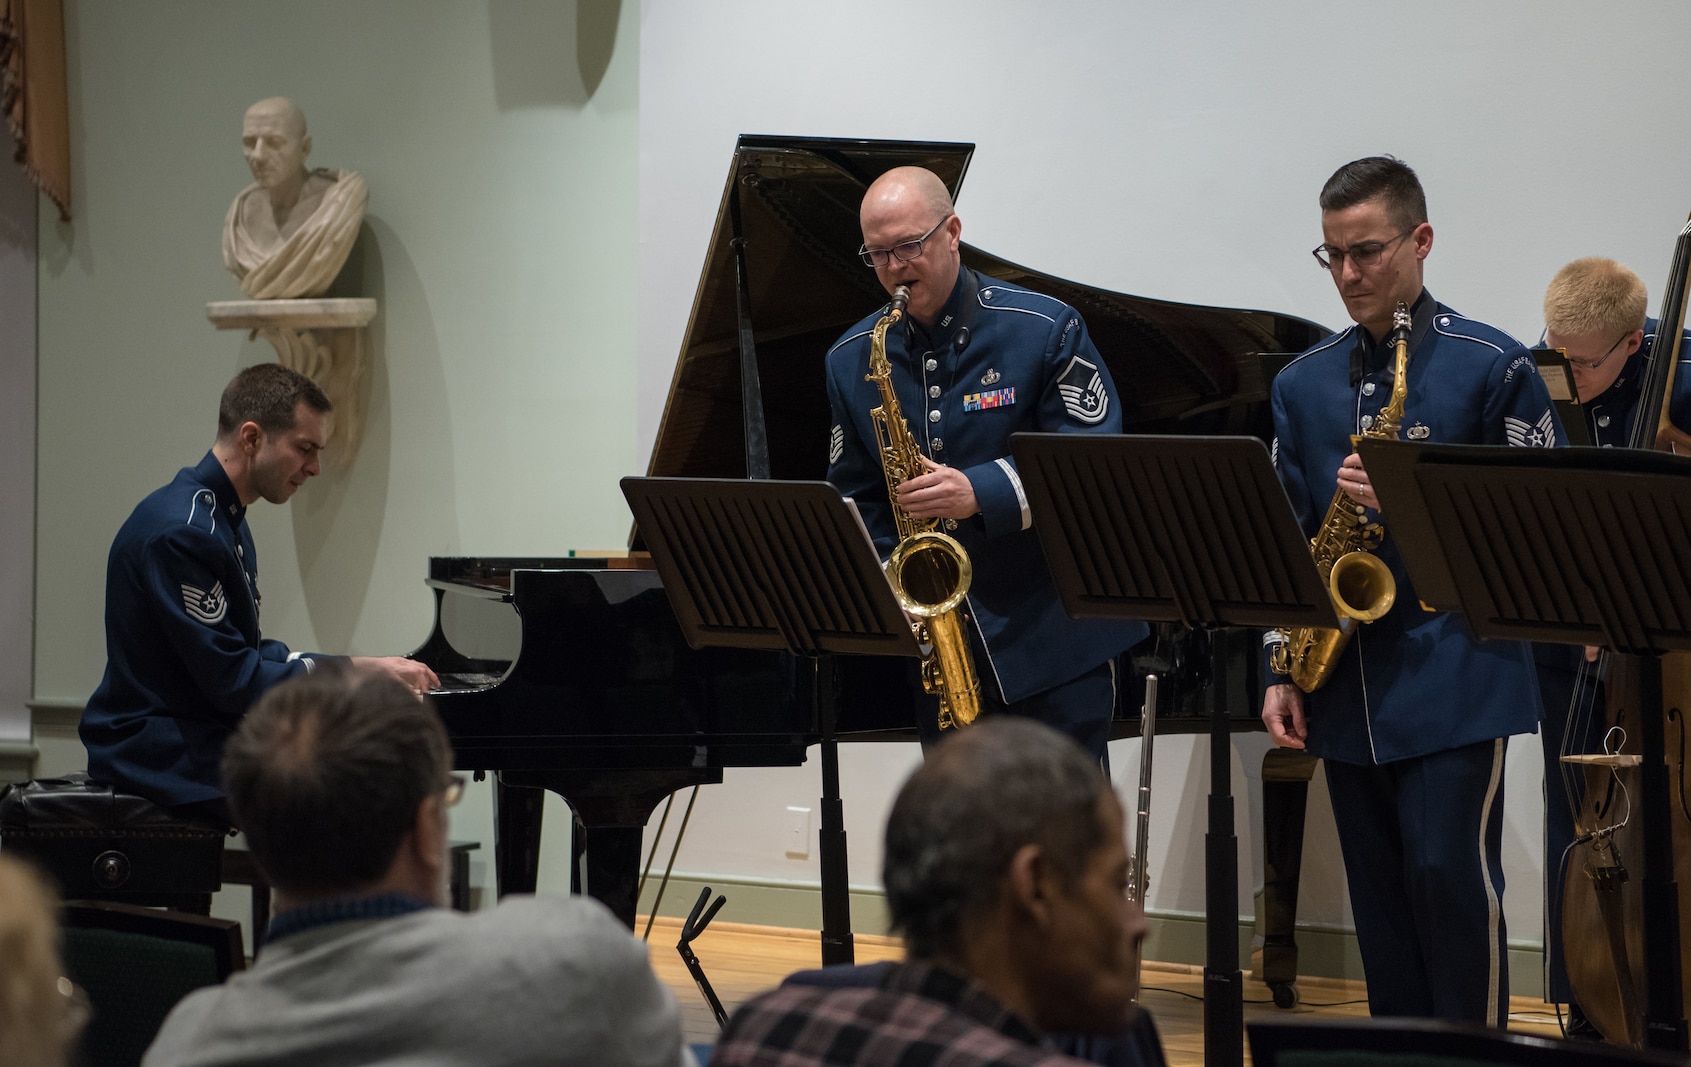 Members of the Airmen of Note perform at the The Lyceum, Alexandria, Virginia's History Museum, on March 7th as part of The U.S. Air Force Band's Chamber Concert Series.